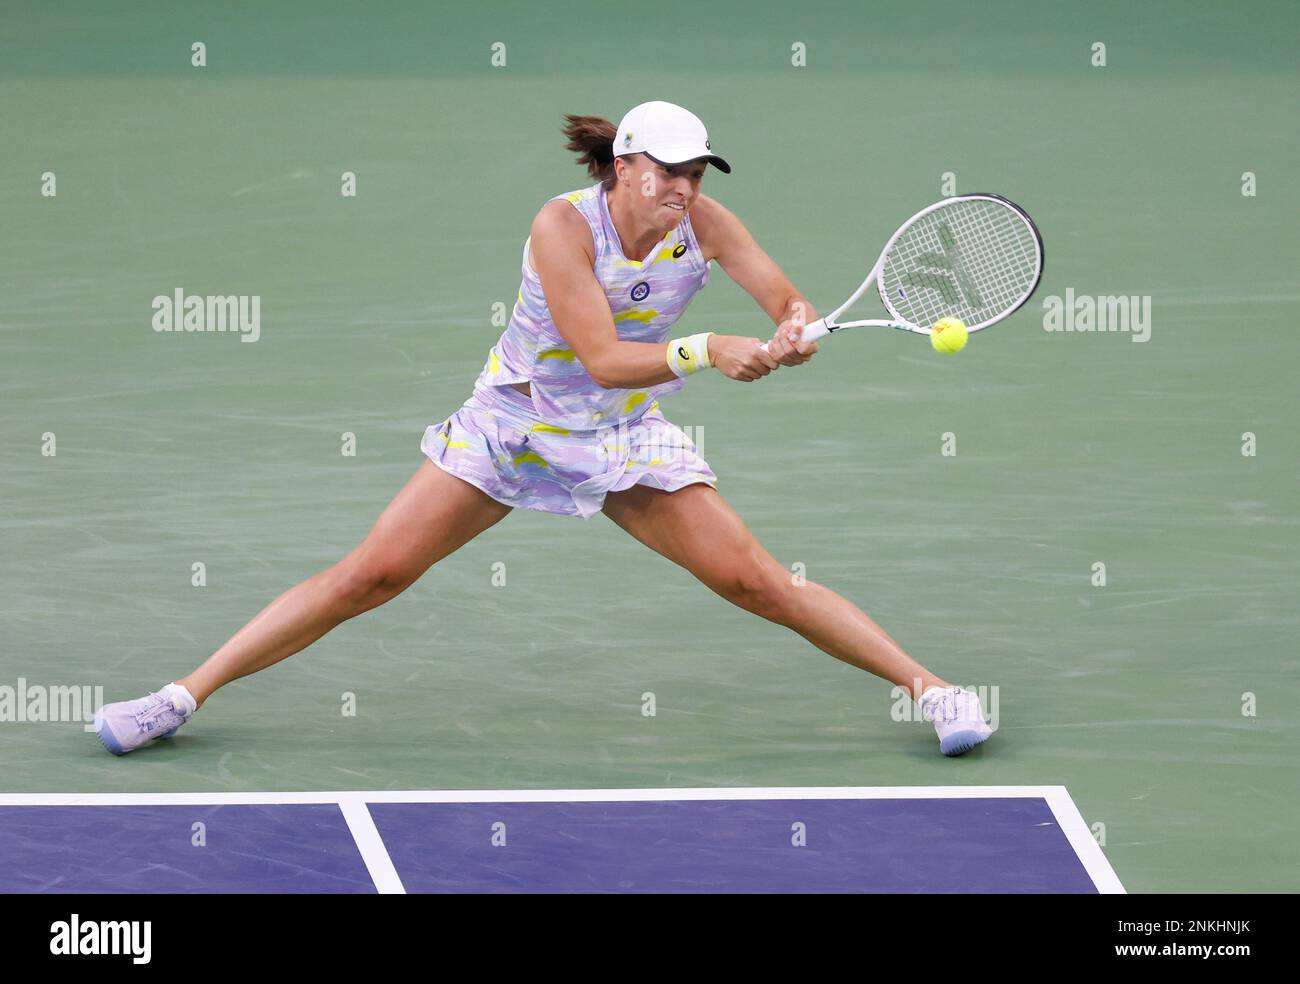 March 18, 2022 Iga Swiatek of Poland returns a shot against Simona Halep of Romania in their semifinal match of the 2022 BNP Paribas Open at Indian Wells Tennis Garden in Indian